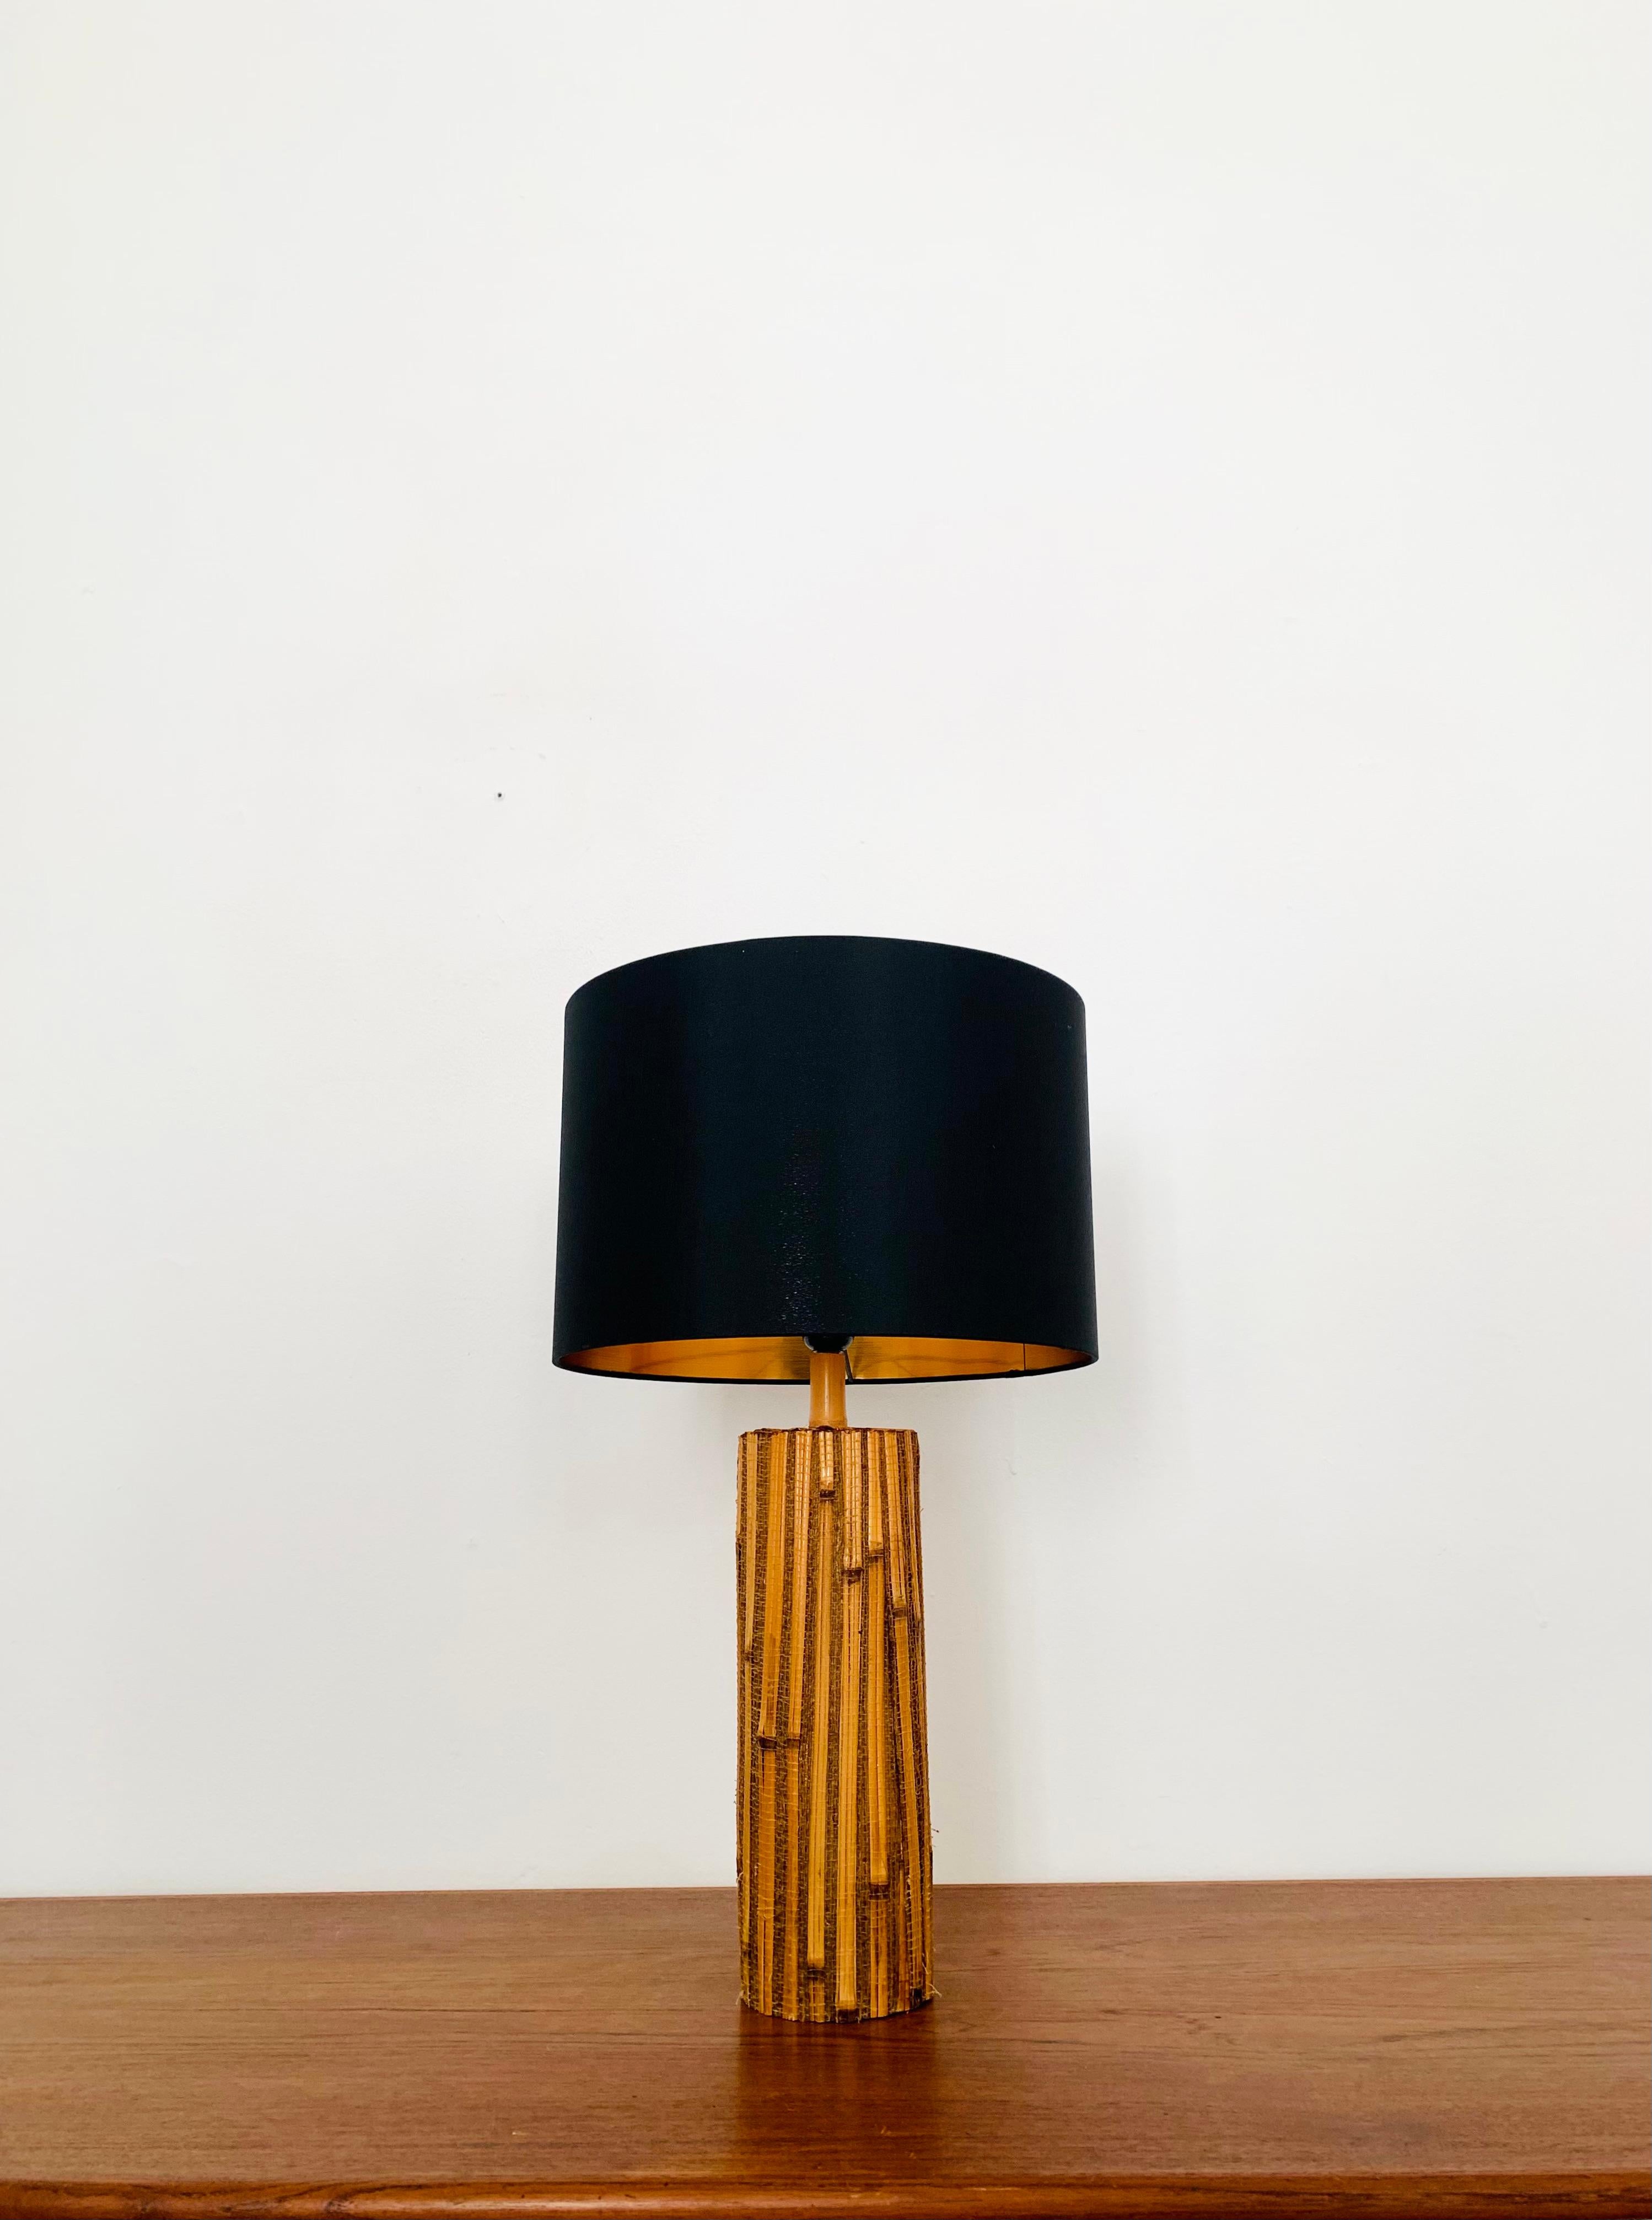 Wonderful bamboo table lamp from the 1960s.
Exceptionally beautiful design and an enrichment for every home.
A cozy lighting mood arises.

Condition:

Very good vintage condition with slight signs of wear.
Signs of use on the bamboo lamp foot.
The